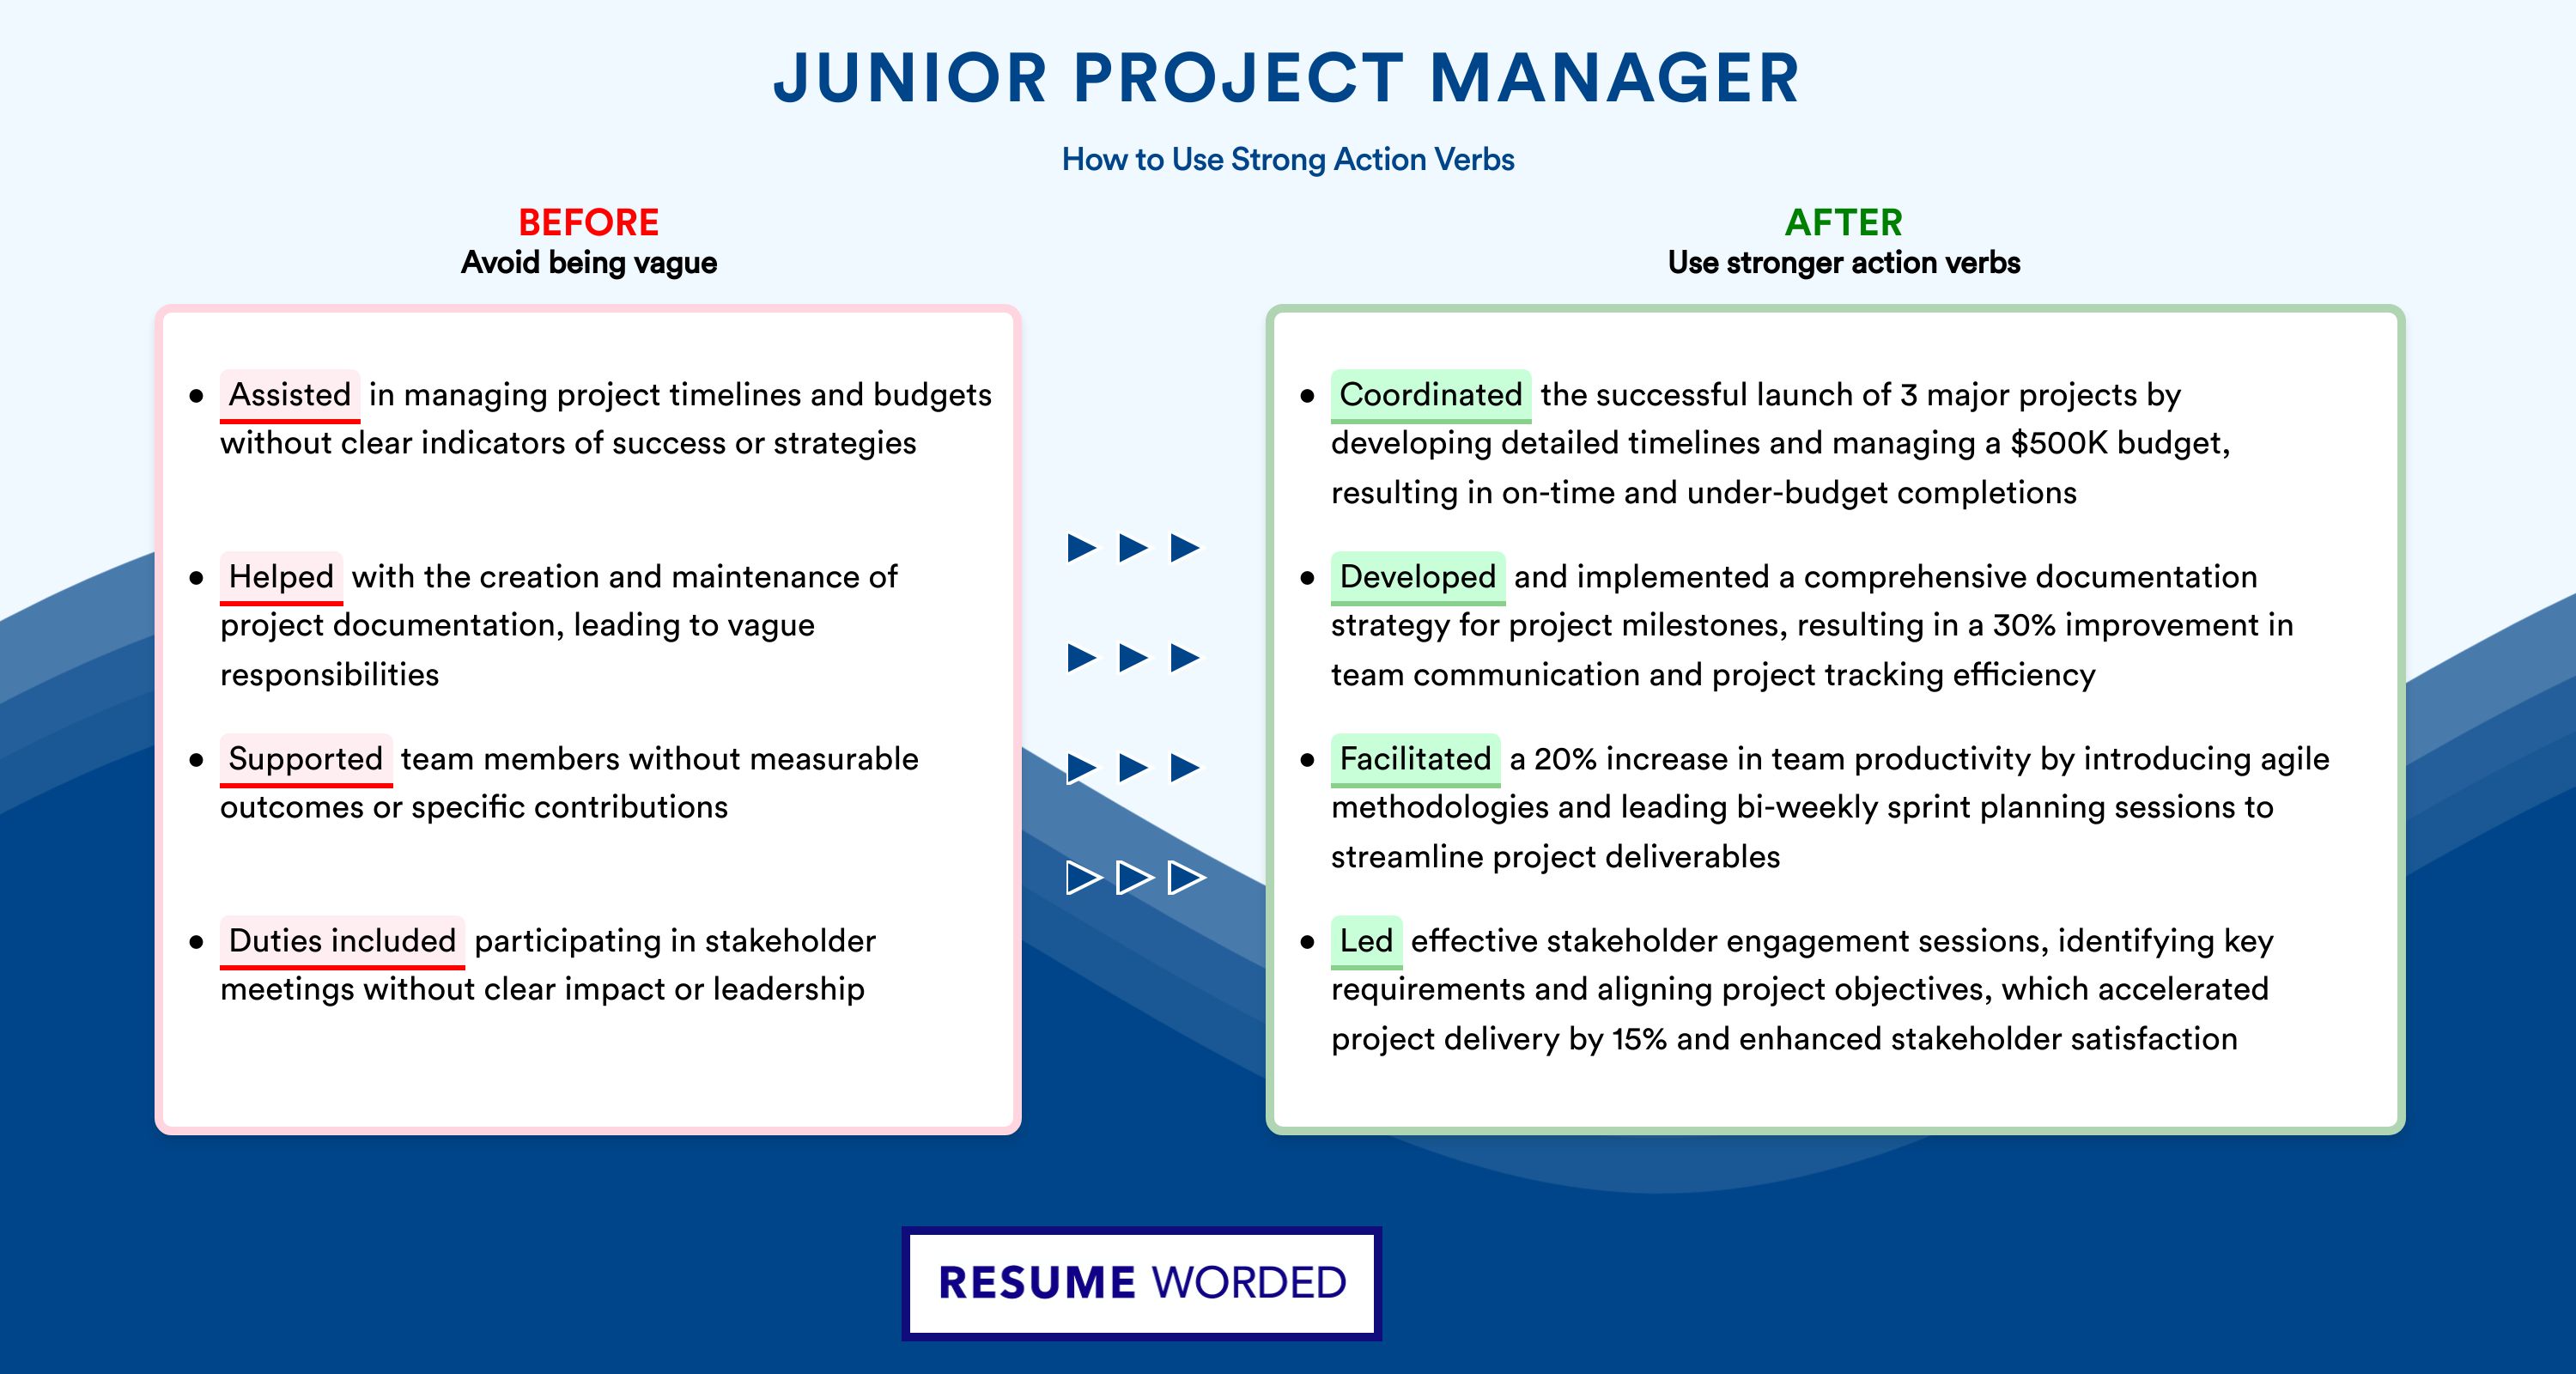 Action Verbs for Junior Project Manager